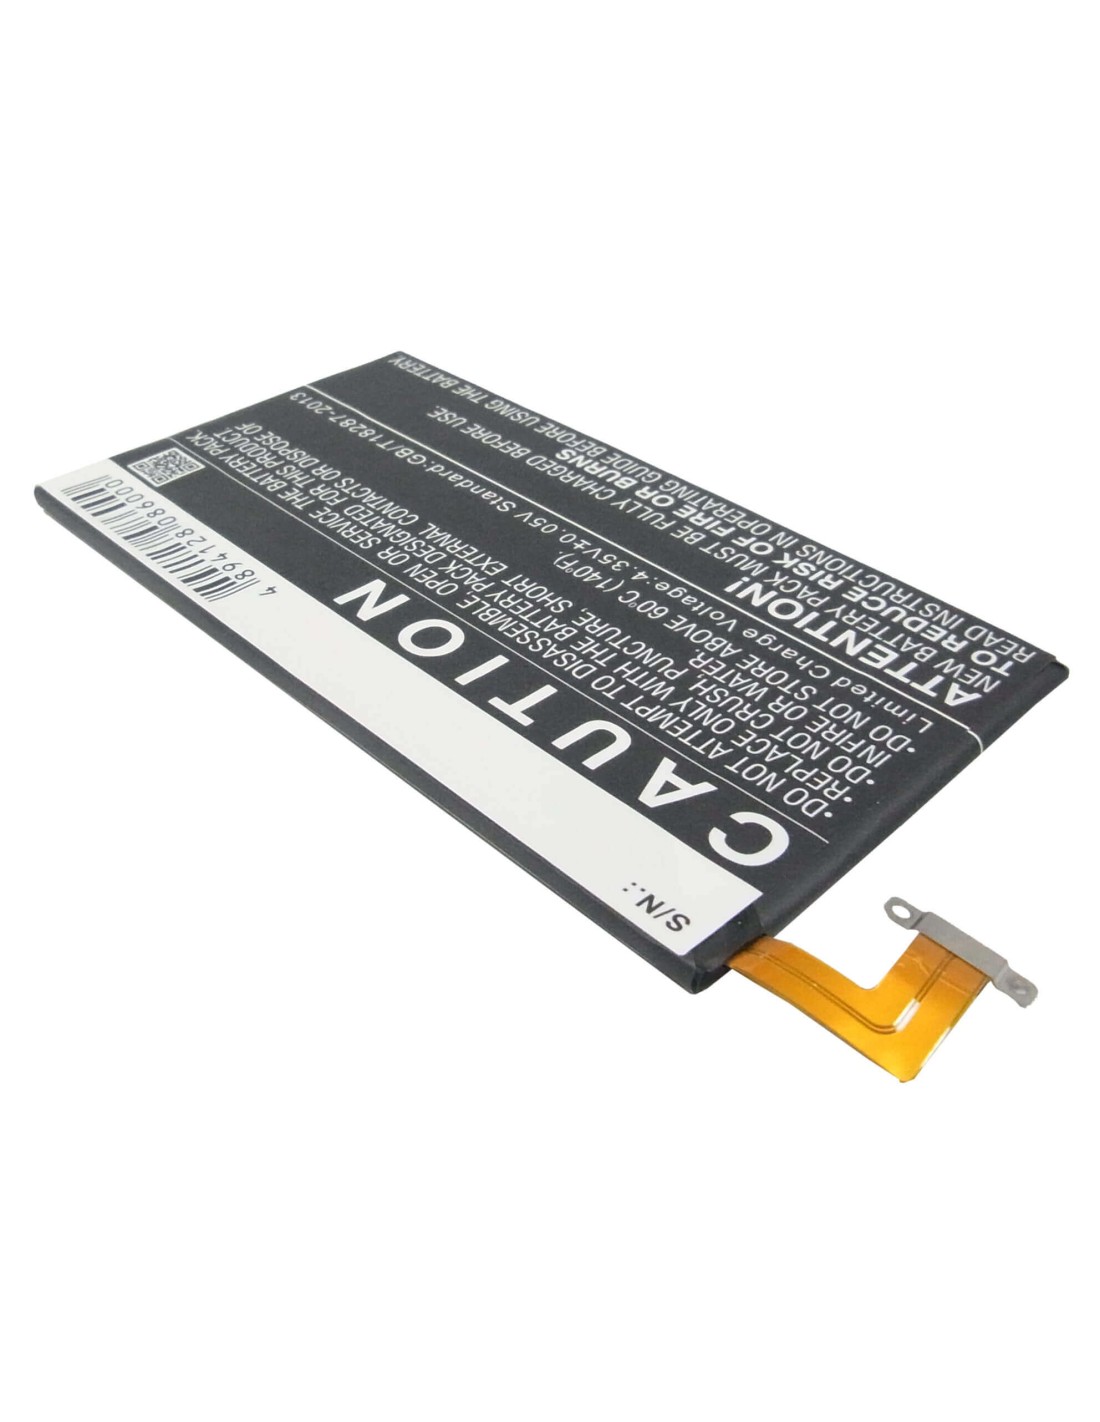 Battery for HTC One Max, One Max 8060, One Max LTE 3.8V, 3300mAh - 12.54Wh